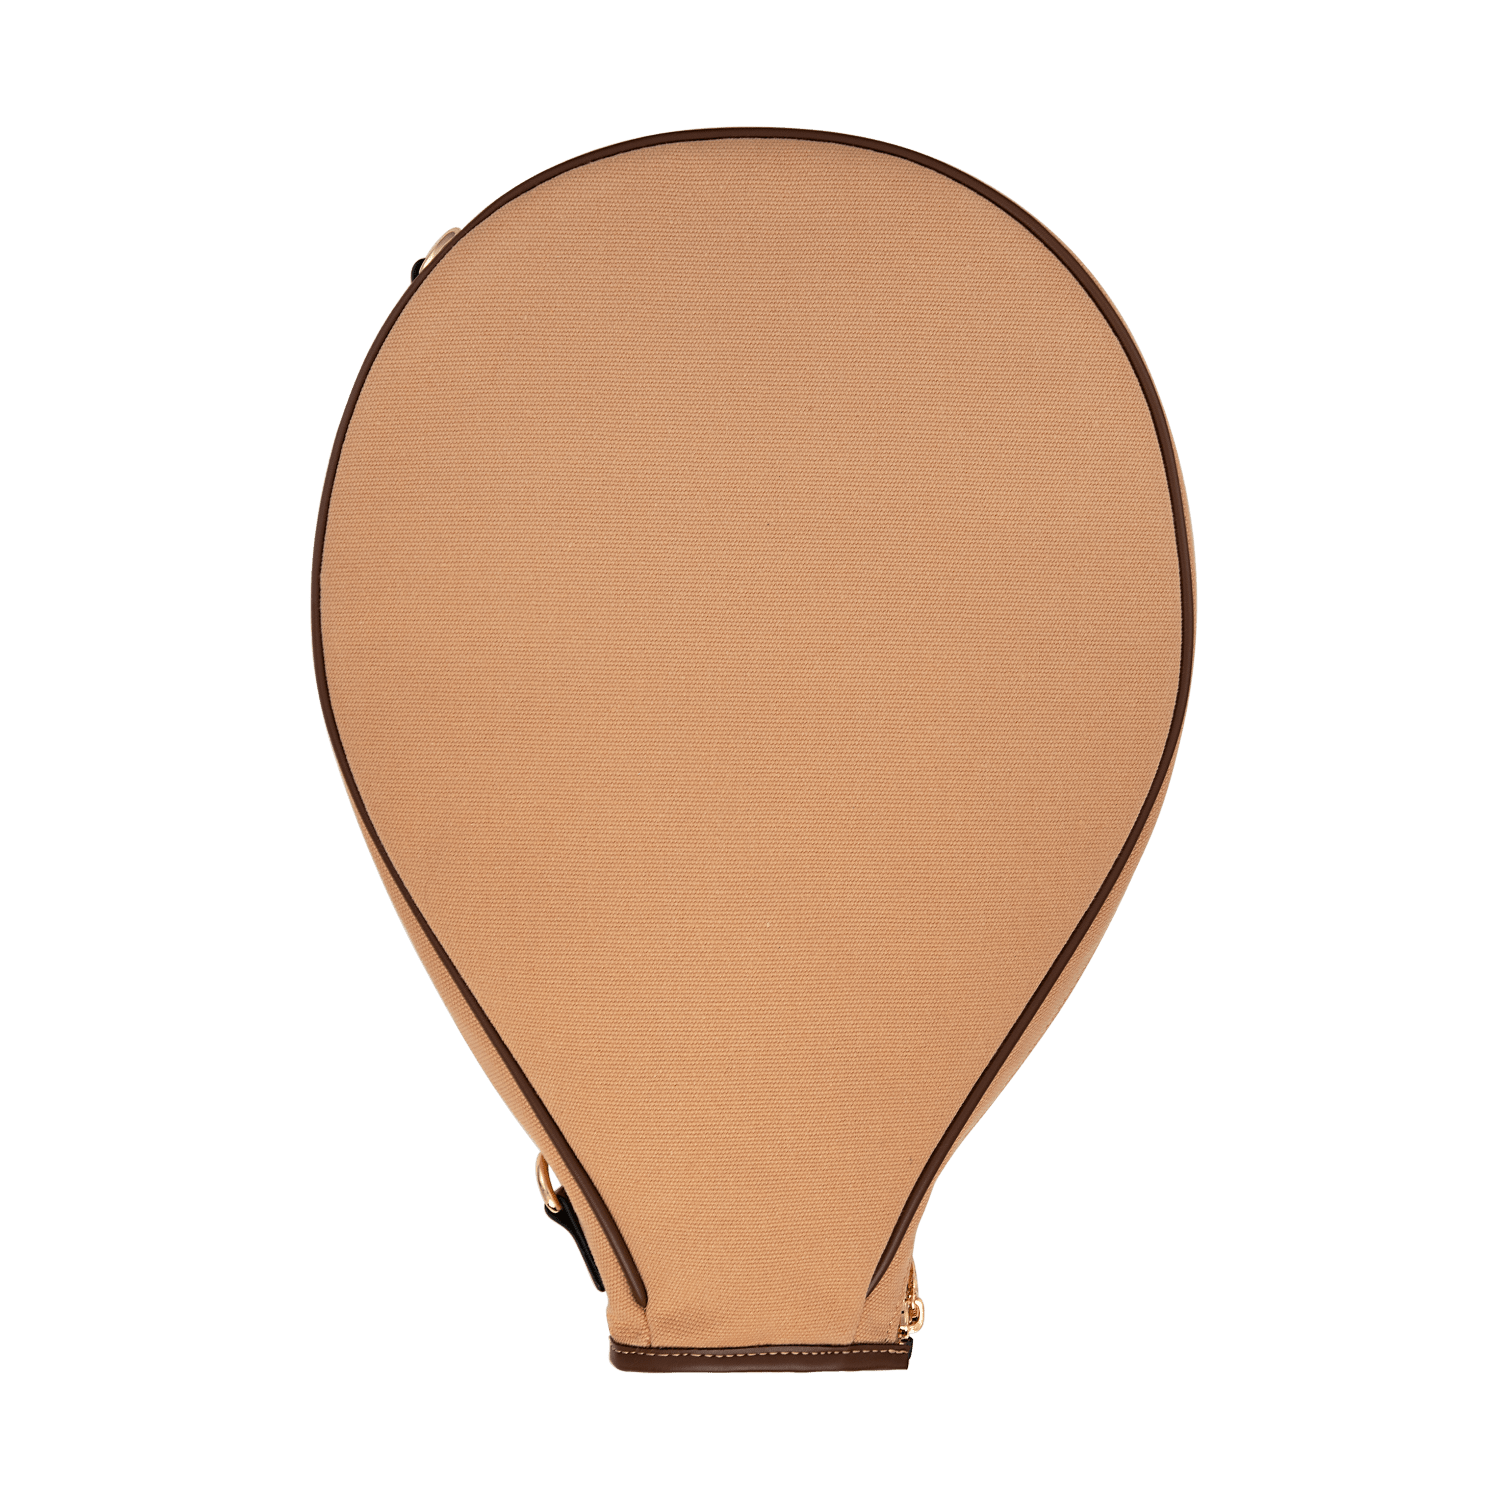 Vintage Louis Vuitton Racket Cover And Racket